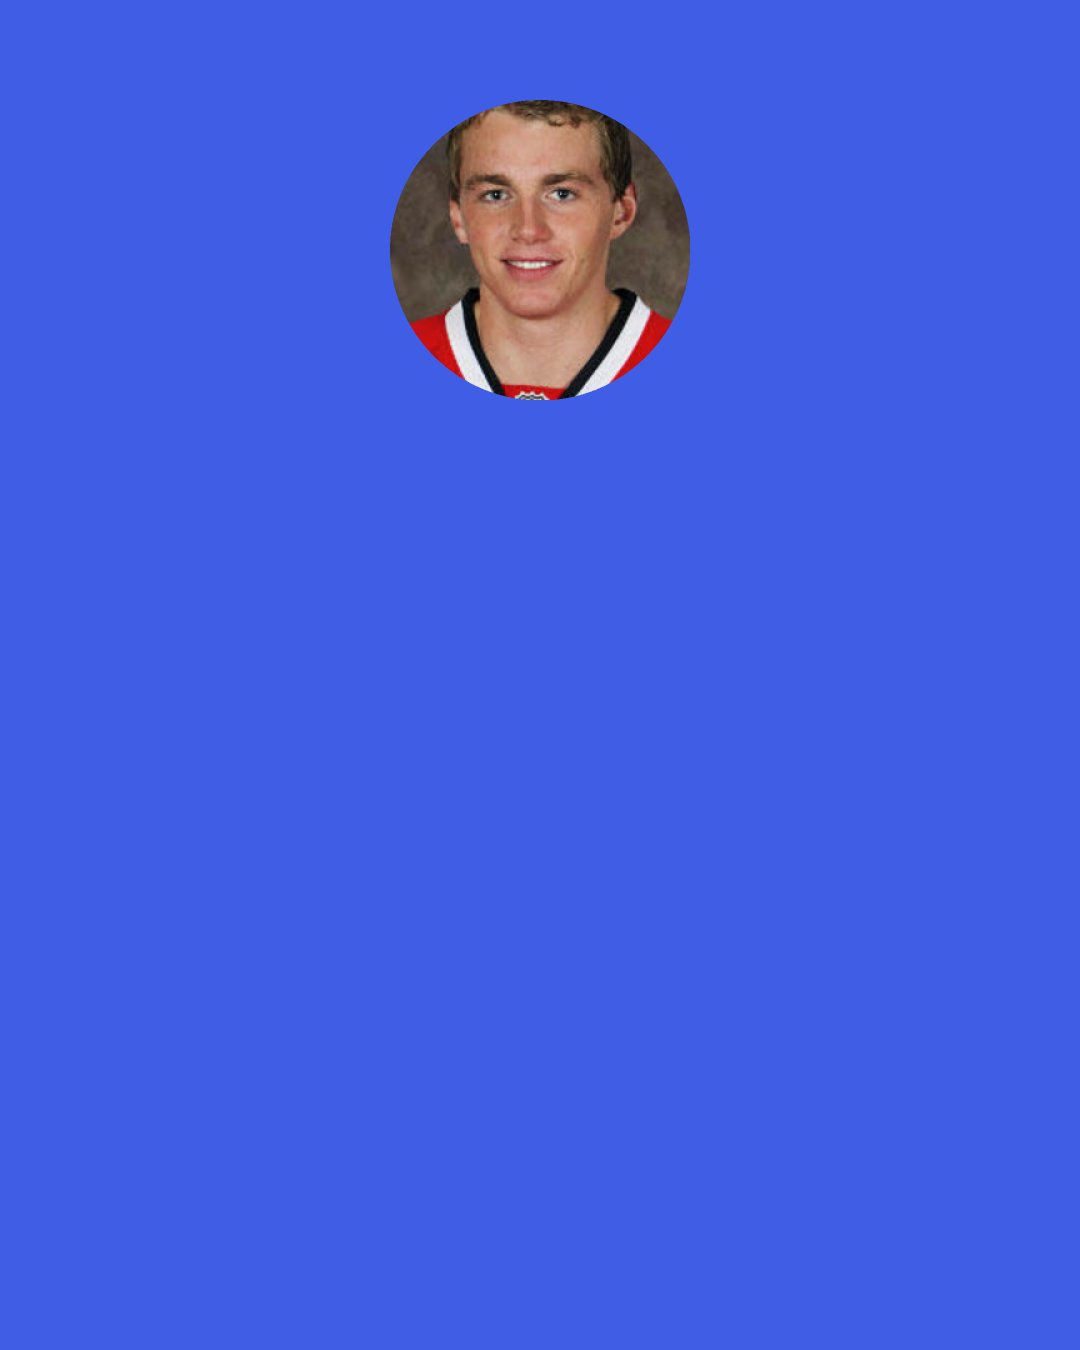 Patrick Kane: People might be making too much of me maturing and growing; I’m still the same person. I still like to joke around and have fun in the locker room and on the road trips. I still get into arguments with Jonathan because we both have strong opinions, and we’re both so comfortable with our relationship that we can argue and still have a healthy friendship.